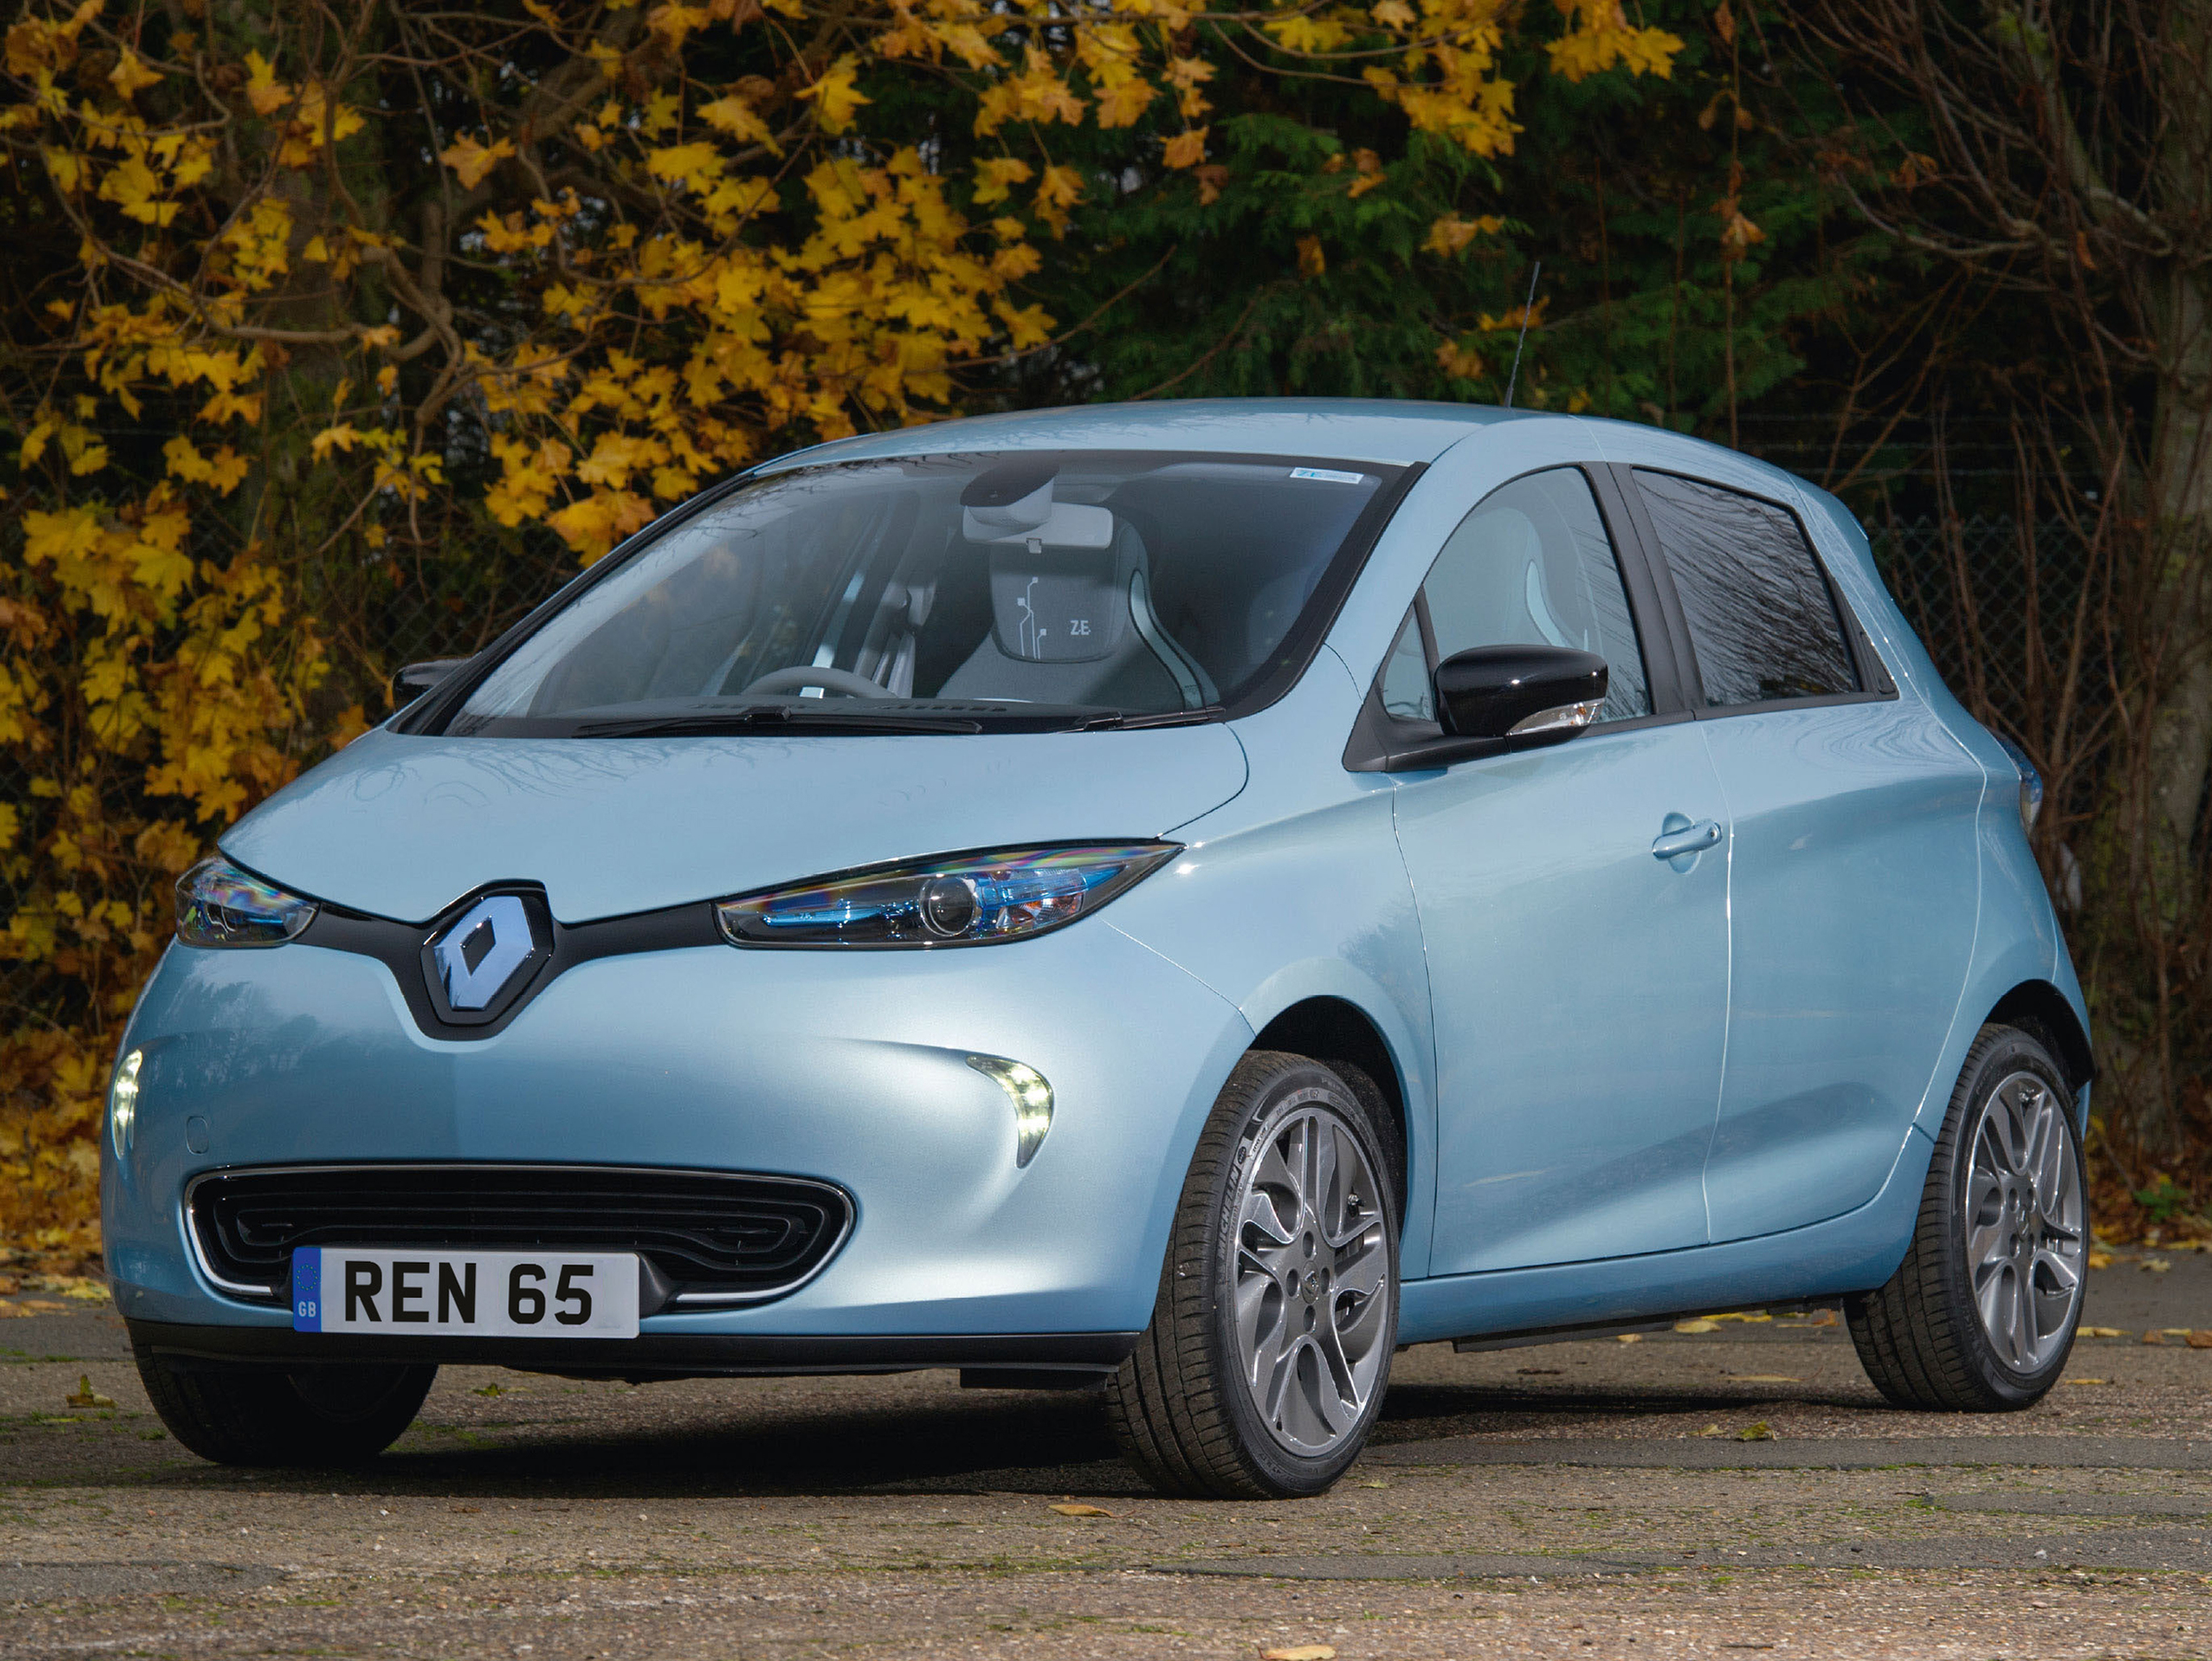 New trim and longer-range motors for Electric Renaults